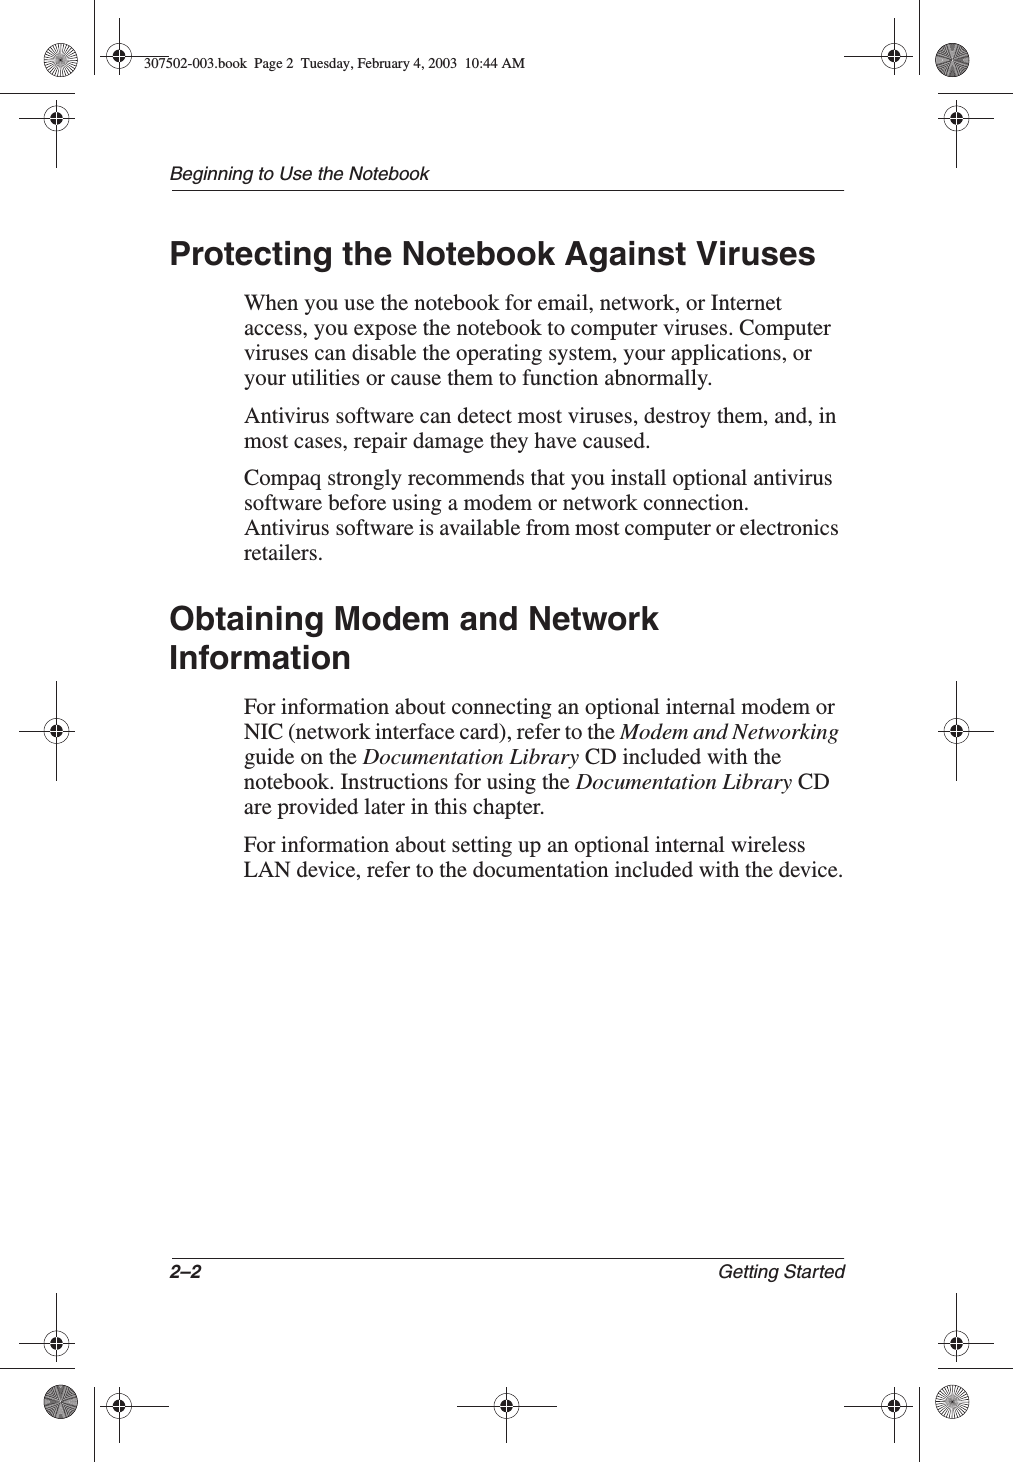 2–2 Getting StartedBeginning to Use the NotebookProtecting the Notebook Against VirusesWhen you use the notebook for email, network, or Internet access, you expose the notebook to computer viruses. Computer viruses can disable the operating system, your applications, or your utilities or cause them to function abnormally.Antivirus software can detect most viruses, destroy them, and, in most cases, repair damage they have caused.Compaq strongly recommends that you install optional antivirus software before using a modem or network connection. Antivirus software is available from most computer or electronics retailers.Obtaining Modem and Network InformationFor information about connecting an optional internal modem or NIC (network interface card), refer to the Modem and Networkingguide on the Documentation Library CD included with the notebook. Instructions for using the Documentation Library CD are provided later in this chapter.For information about setting up an optional internal wireless LAN device, refer to the documentation included with the device.307502-003.book  Page 2  Tuesday, February 4, 2003  10:44 AM